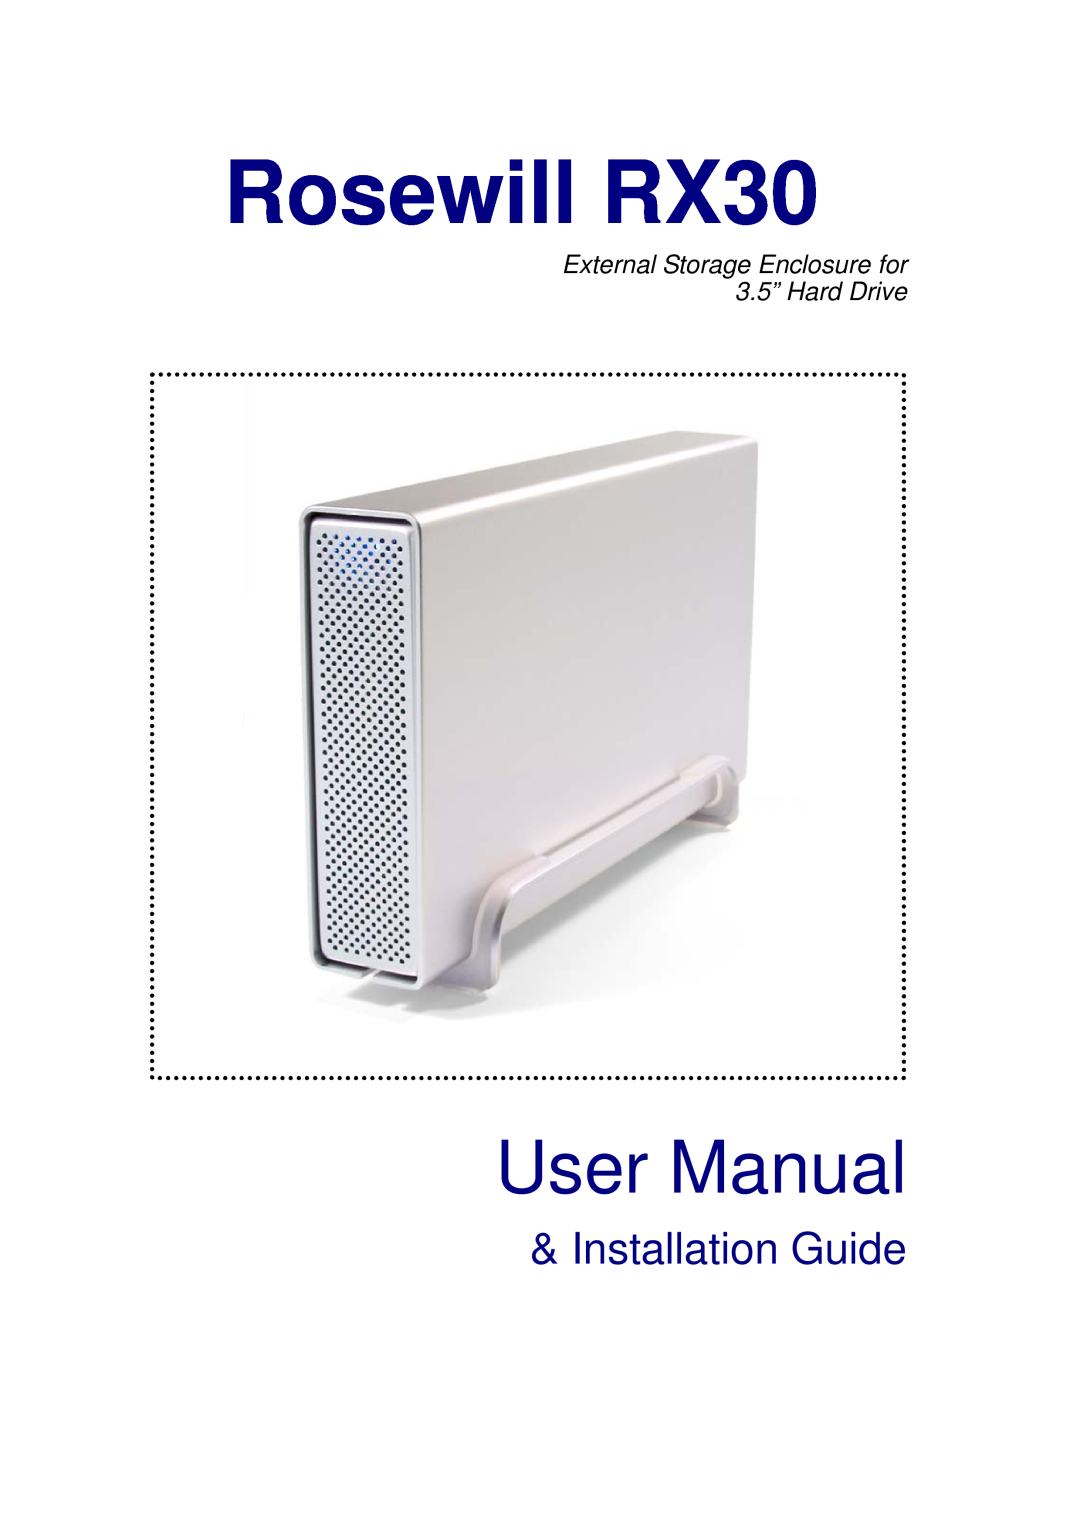 Rosewill manual Rosewill RX30, User Manual, Installation Guide, External Storage Enclosure for 3.5” Hard Drive 